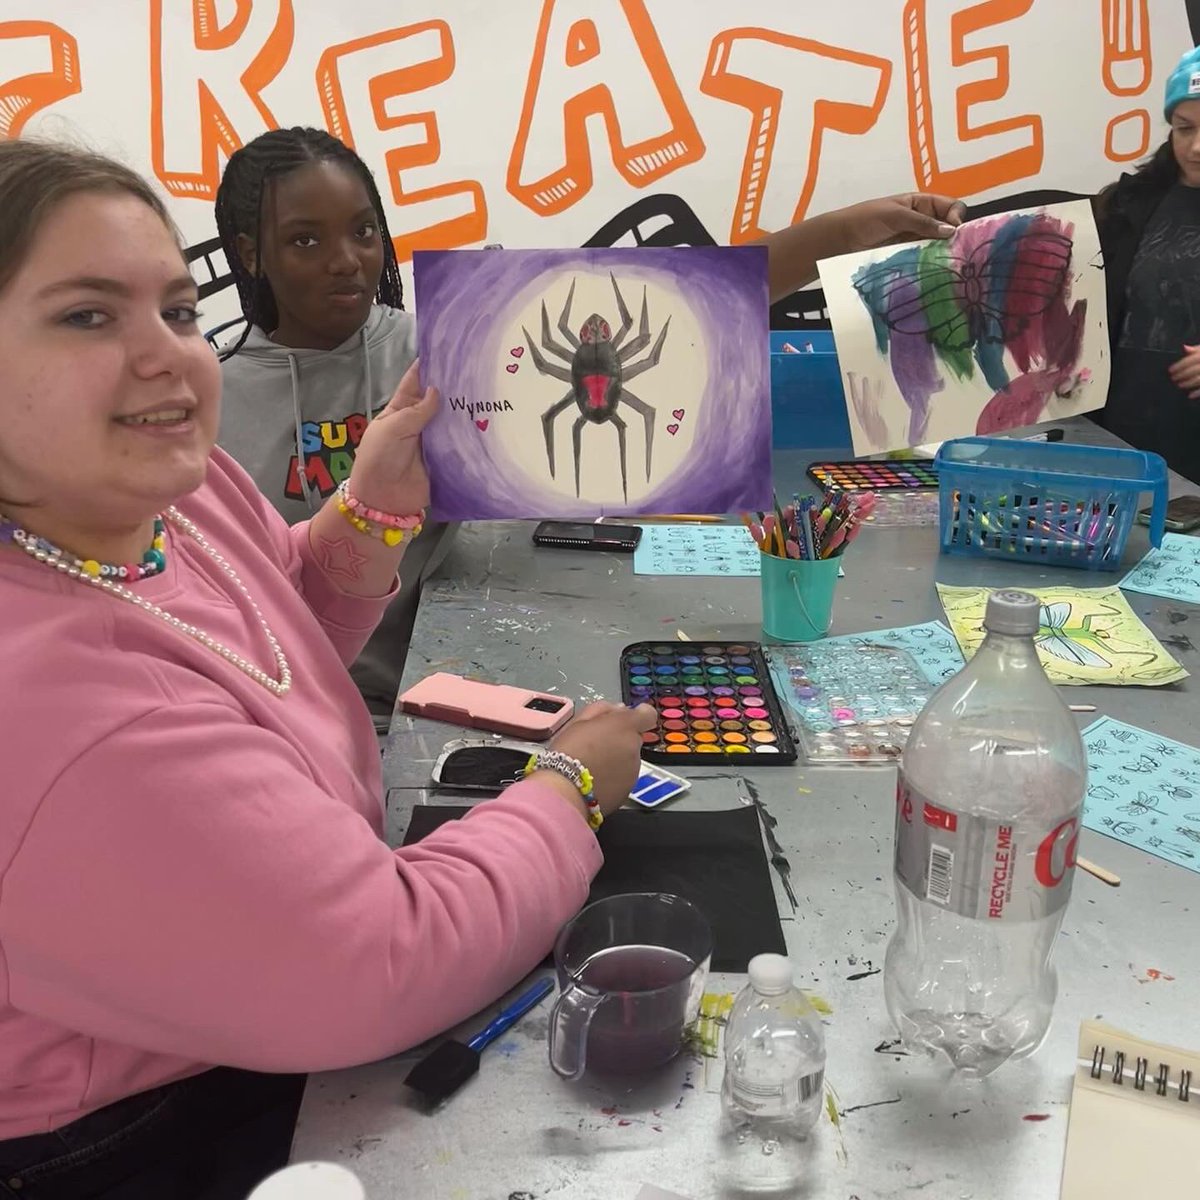 Brushes in hand, creativity unleashed! 🎨 🖌️Our Visual Arts class is diving into the world of bugs and insects to create these colorful masterpieces!🦋
#lightofchance #breatheyoutharts #youtharts #music #dance #visualarts #culinary #creativewriting #madisonvilleky #bowlinggreenky